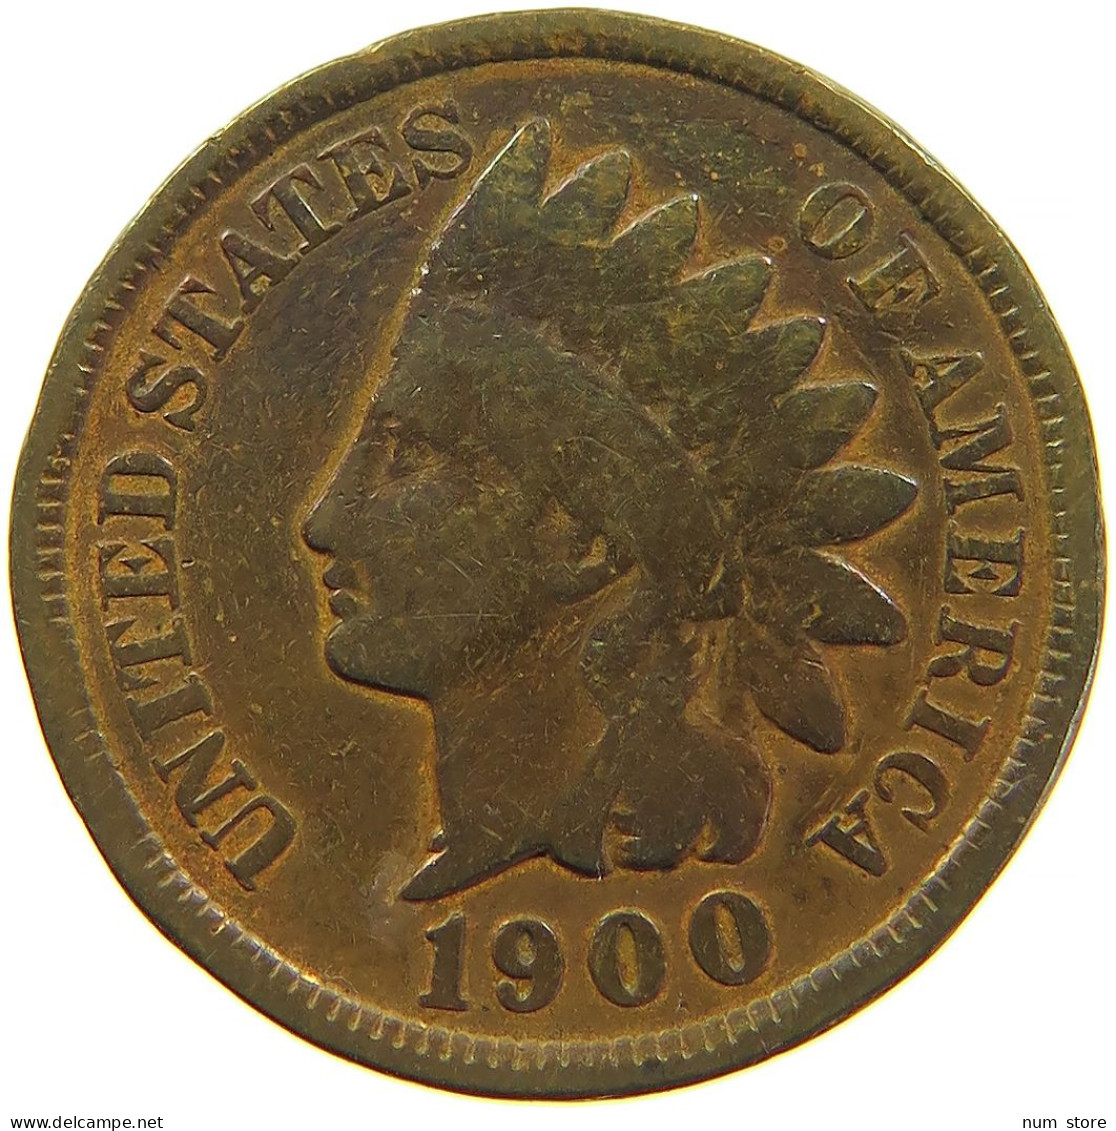 UNITED STATES OF AMERICA CENT 1900 INDIAN HEAD #s091 0363 - 1859-1909: Indian Head